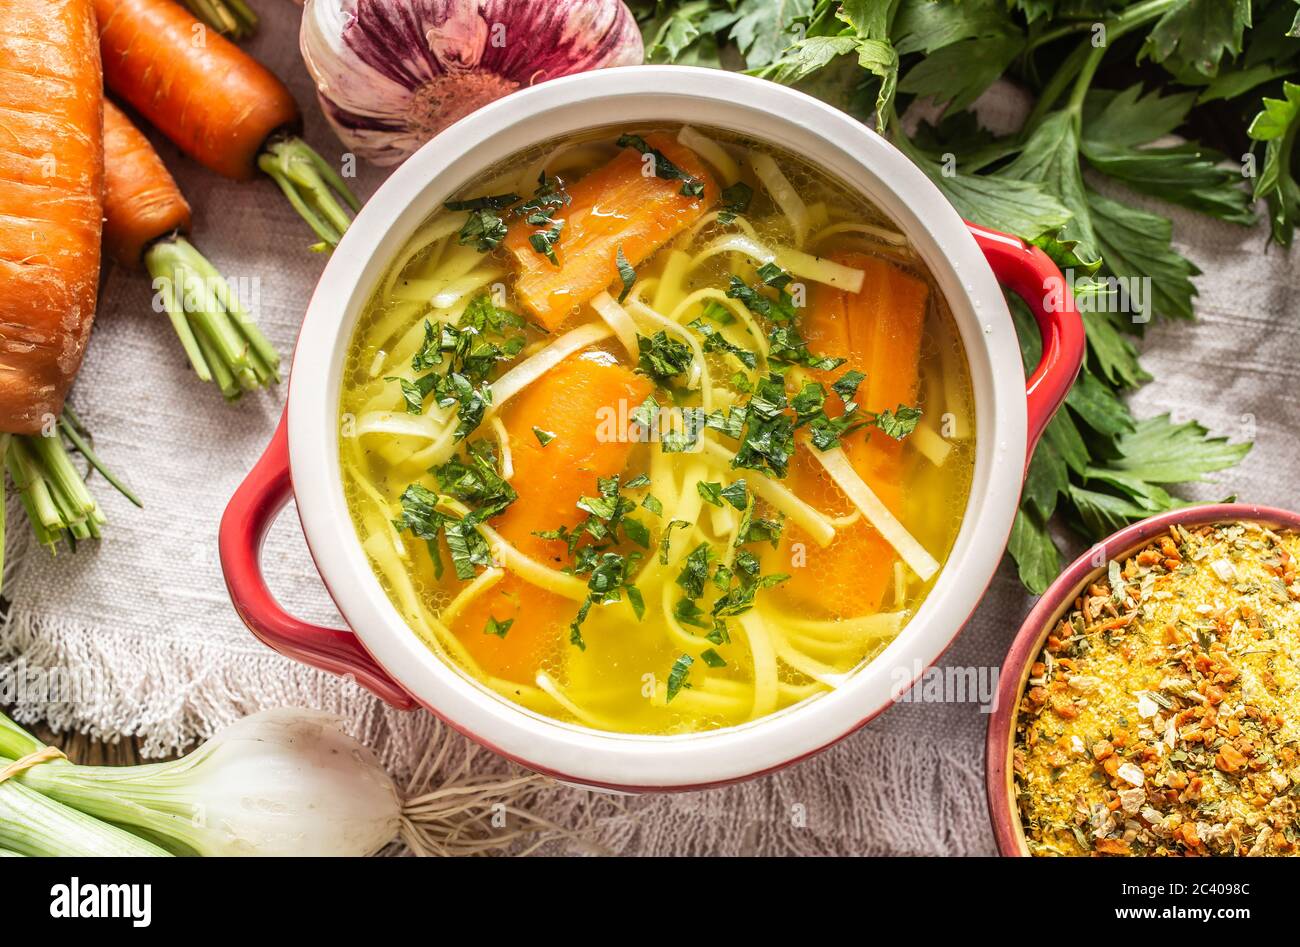 Chicken soup broth in a vintage bowl with homemade noodles carrot onion celery herbs garlic and fresh vegetables. Stock Photo